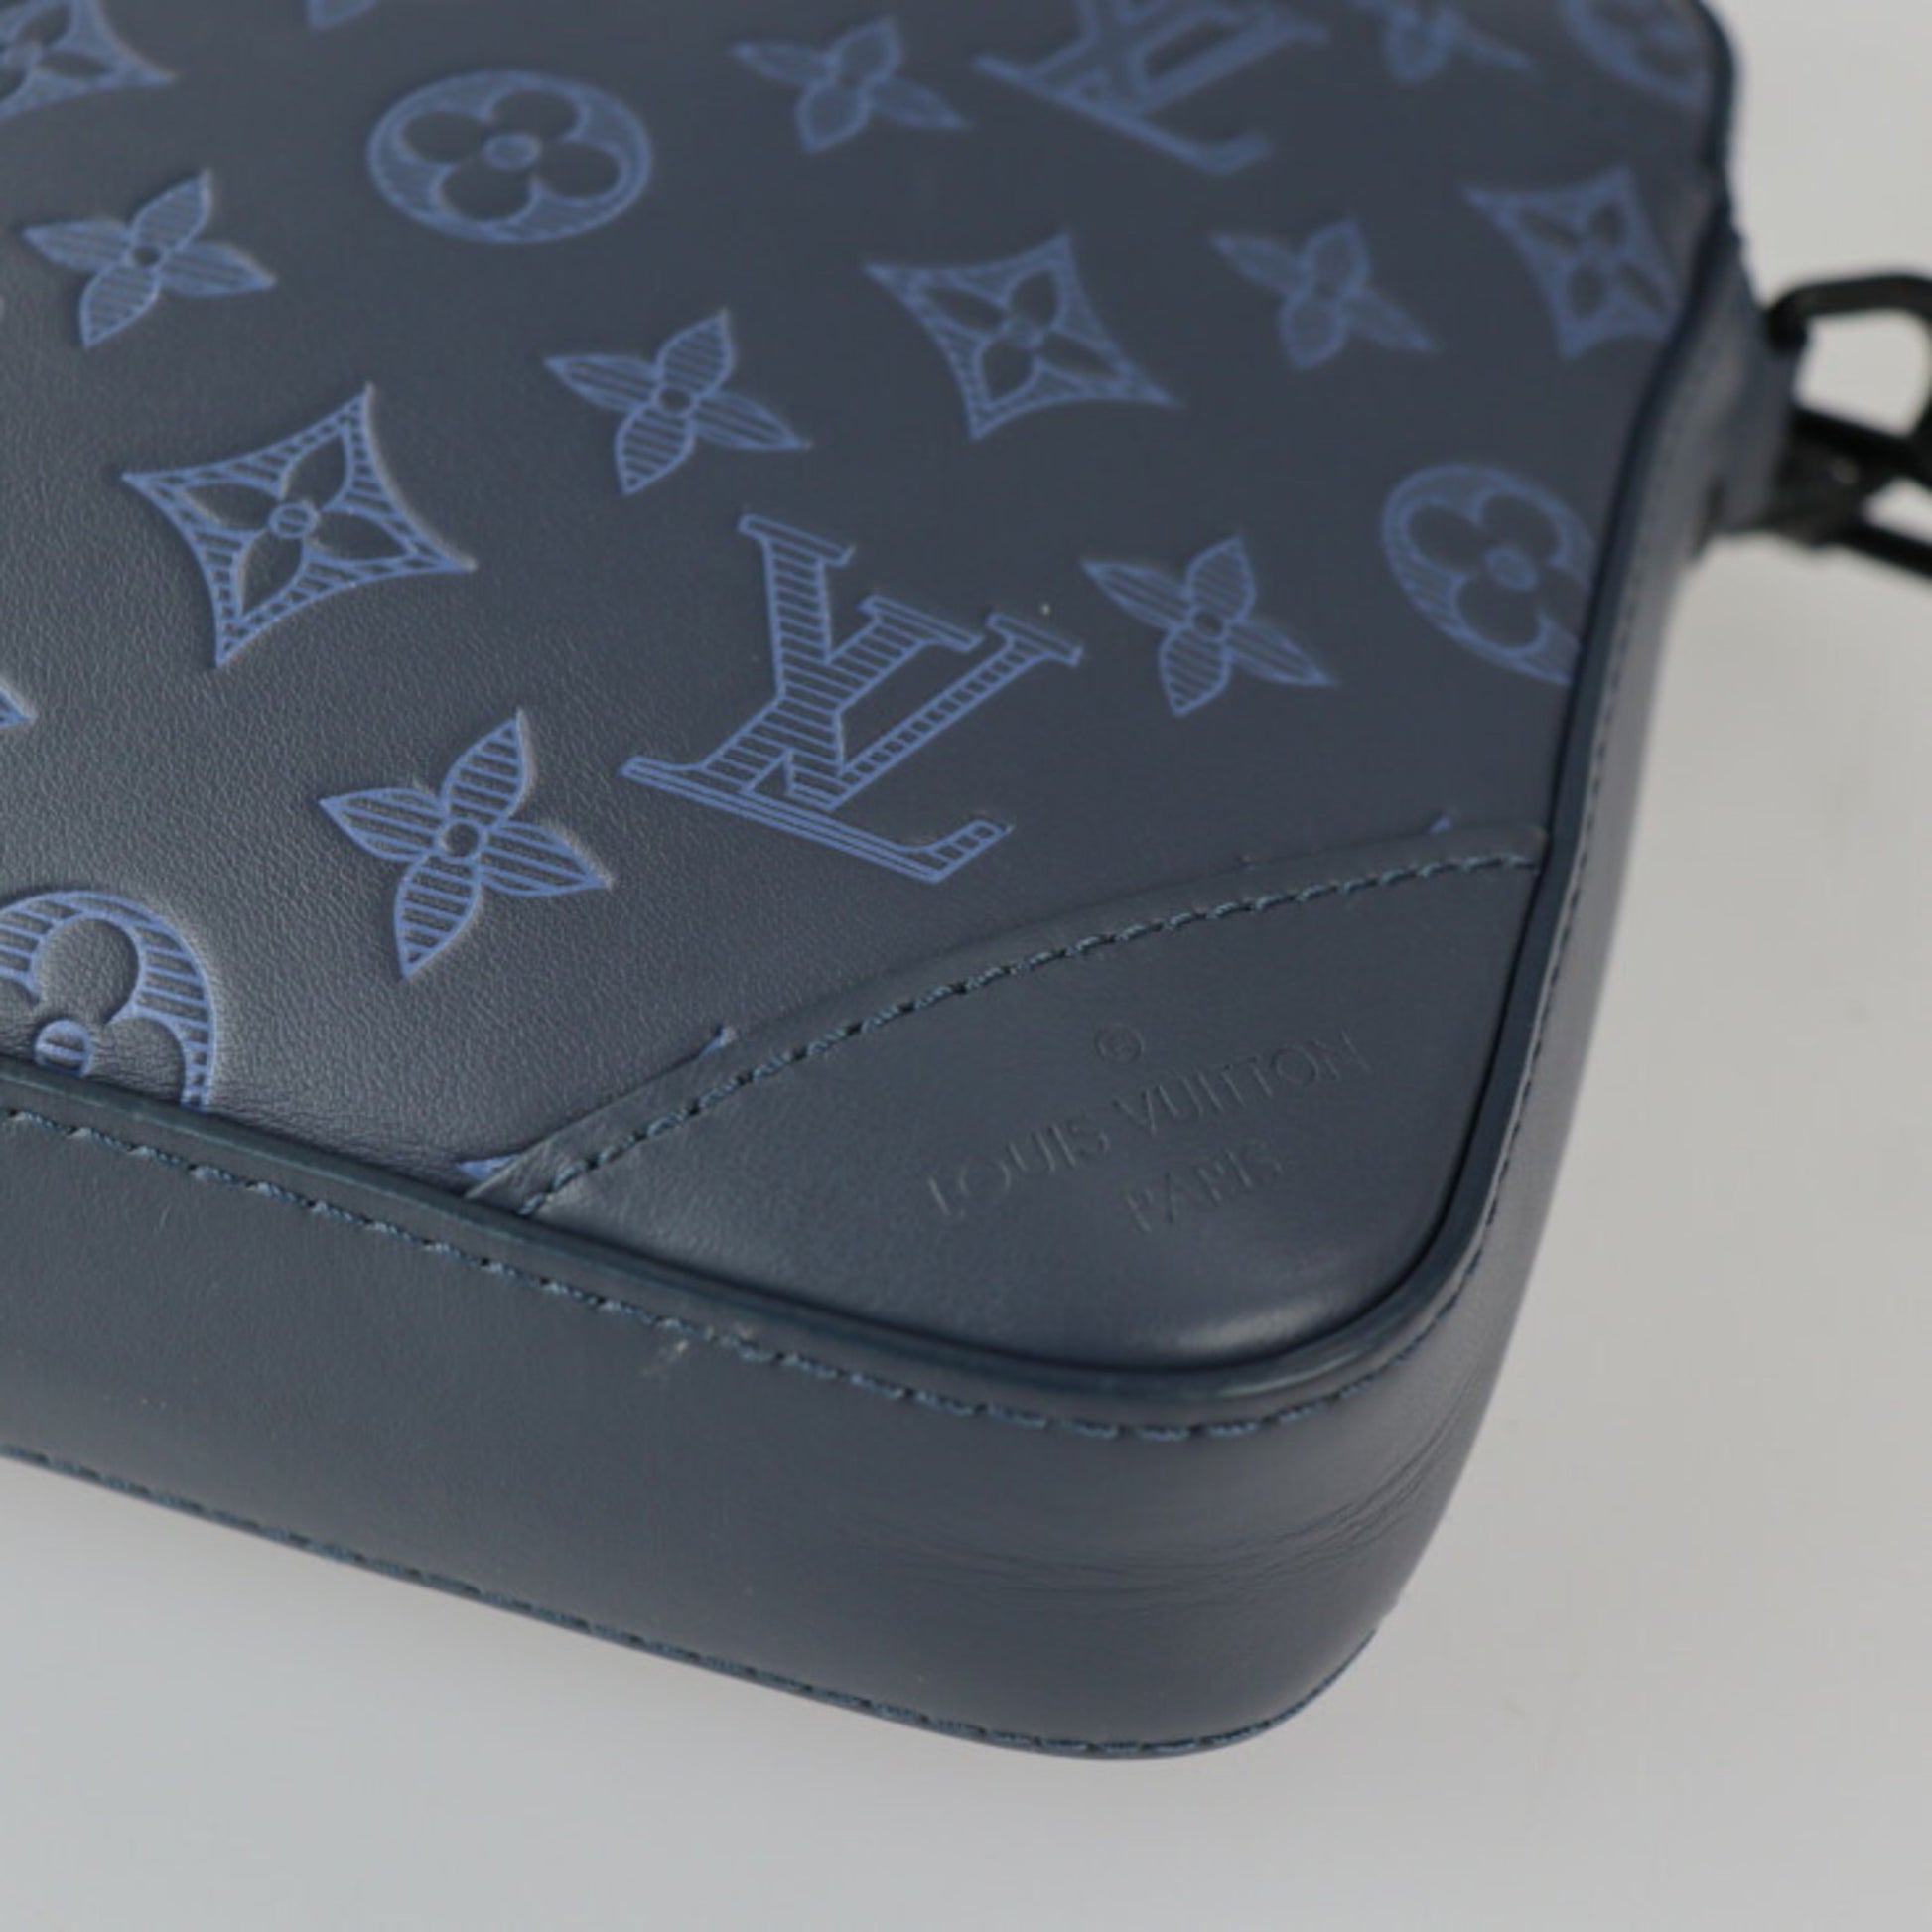 Louis Vuitton M45730 LV Duo Messenger bag in navy blue Monogram Shadow  leather – iPerfectbags